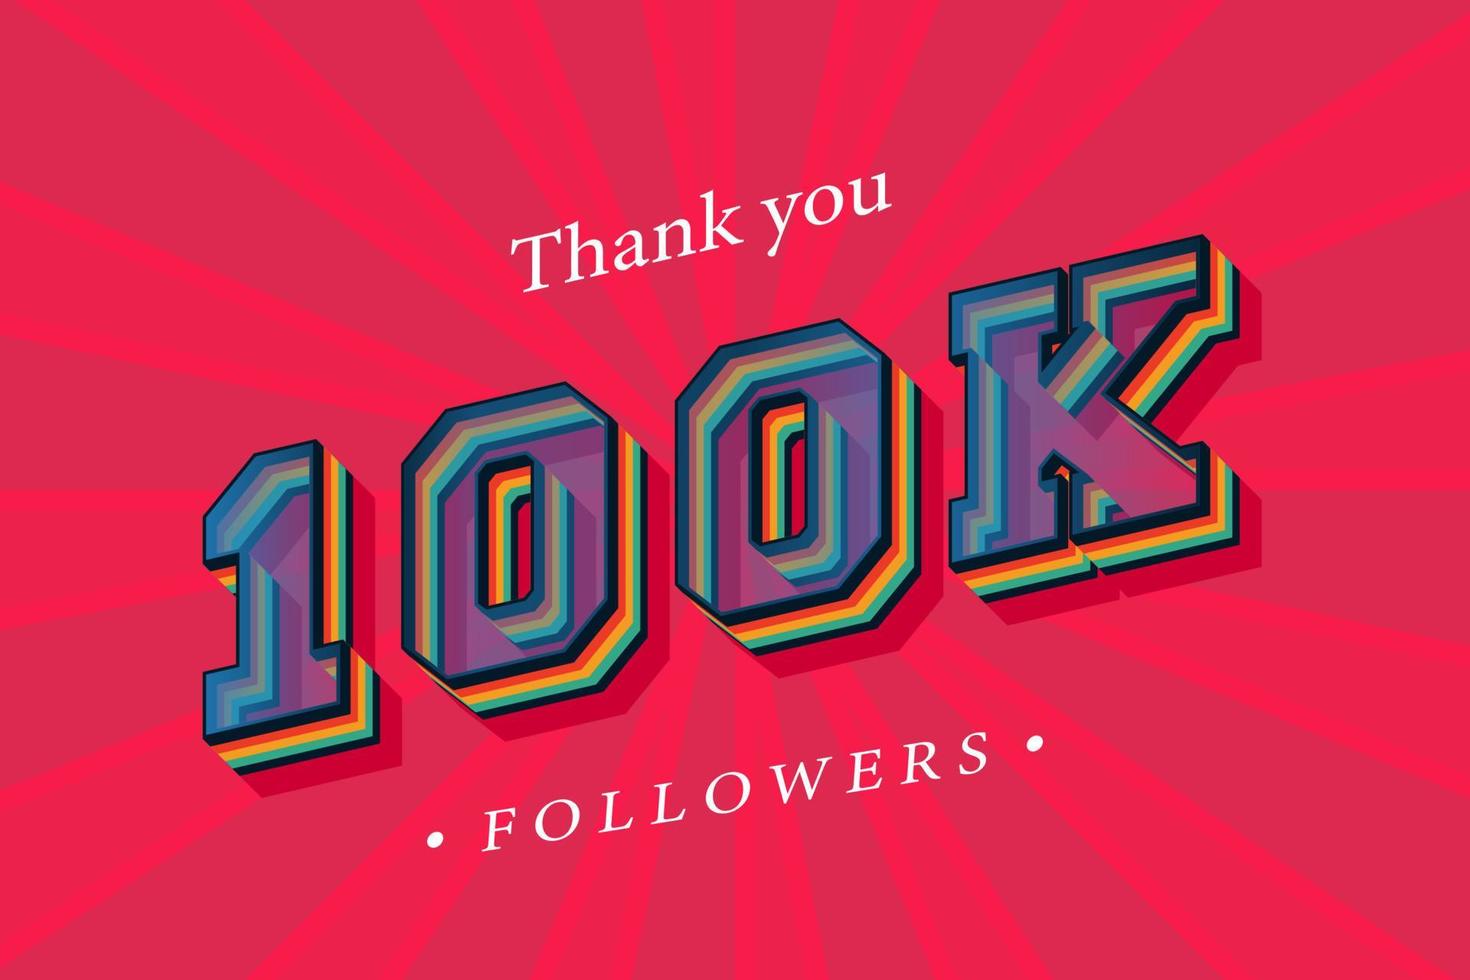 Thank you 100k social followers and subscribers with numbers Trendy Retro text effect 3d render vector